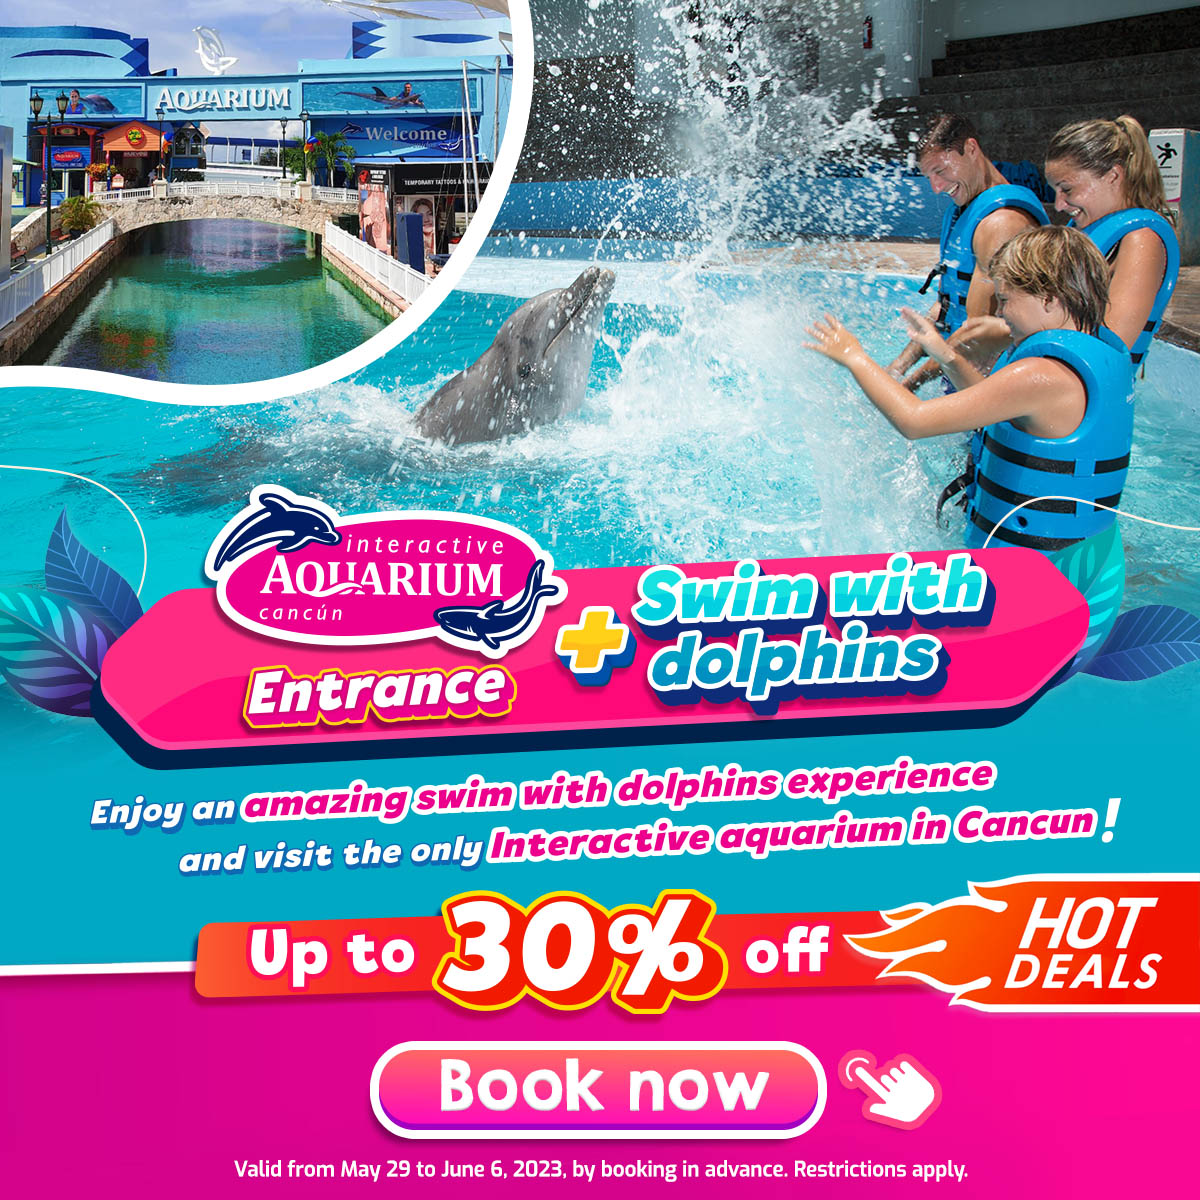 Swim with dolphins Cancun Hot deals